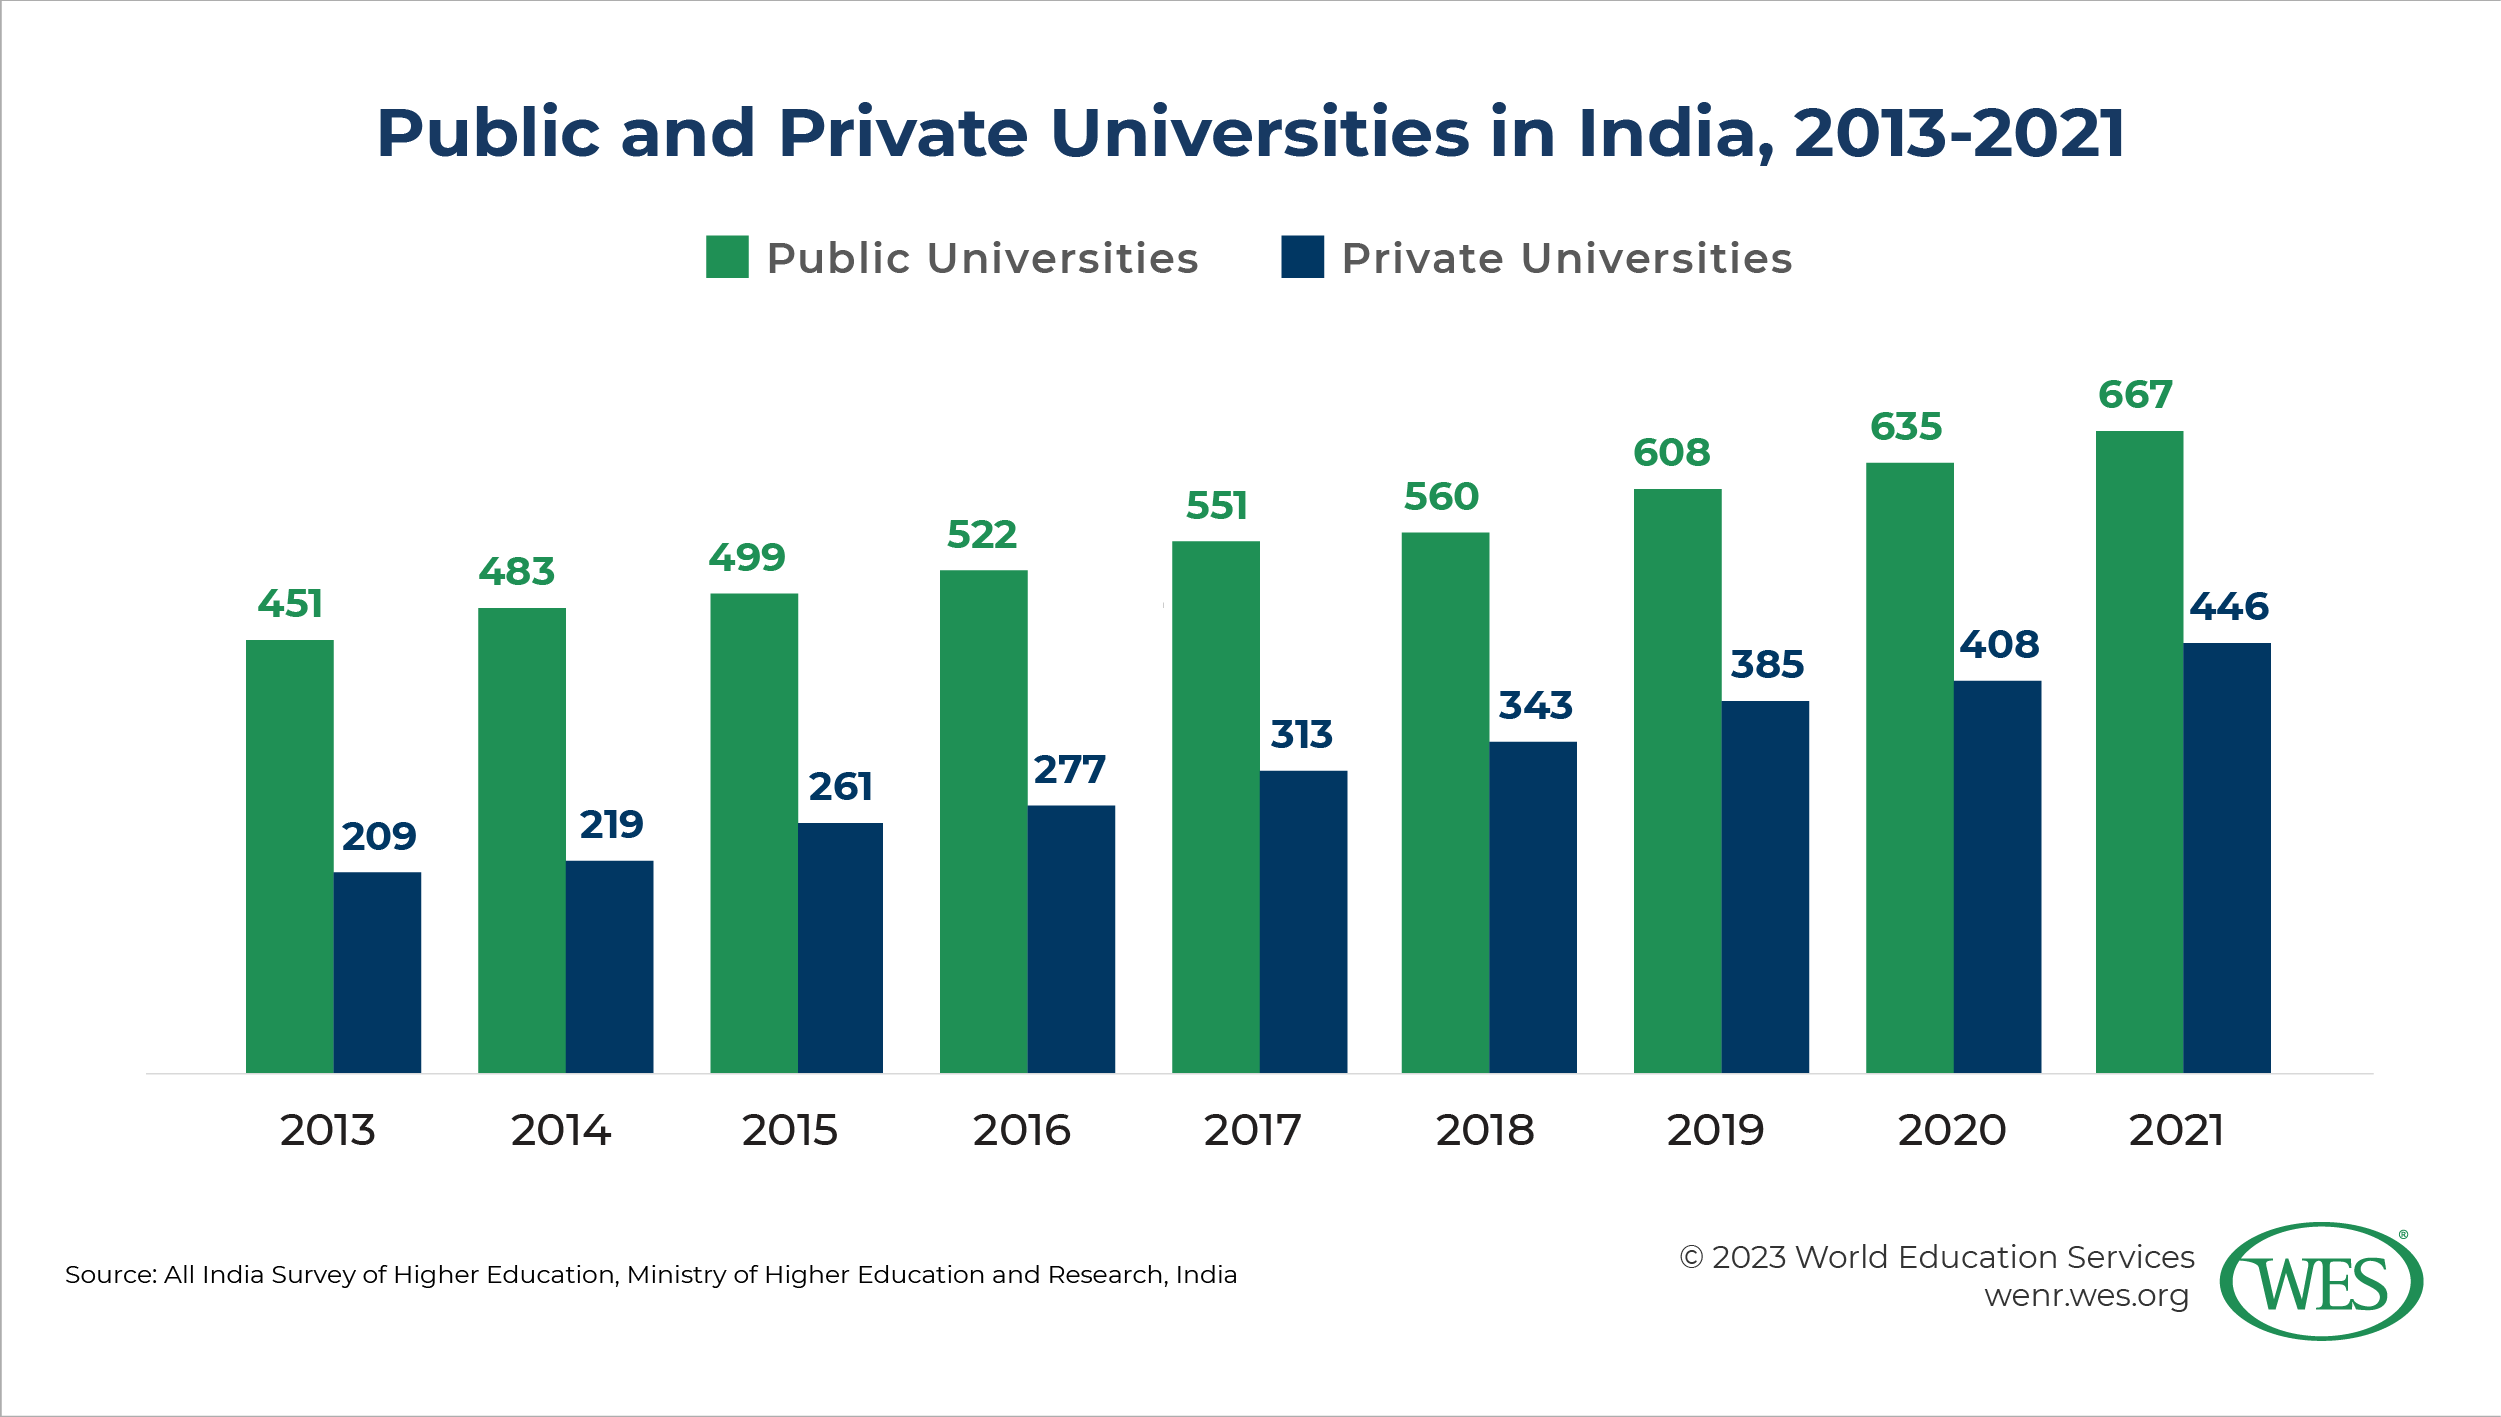 Number of public and private universities in India, 2013-2021